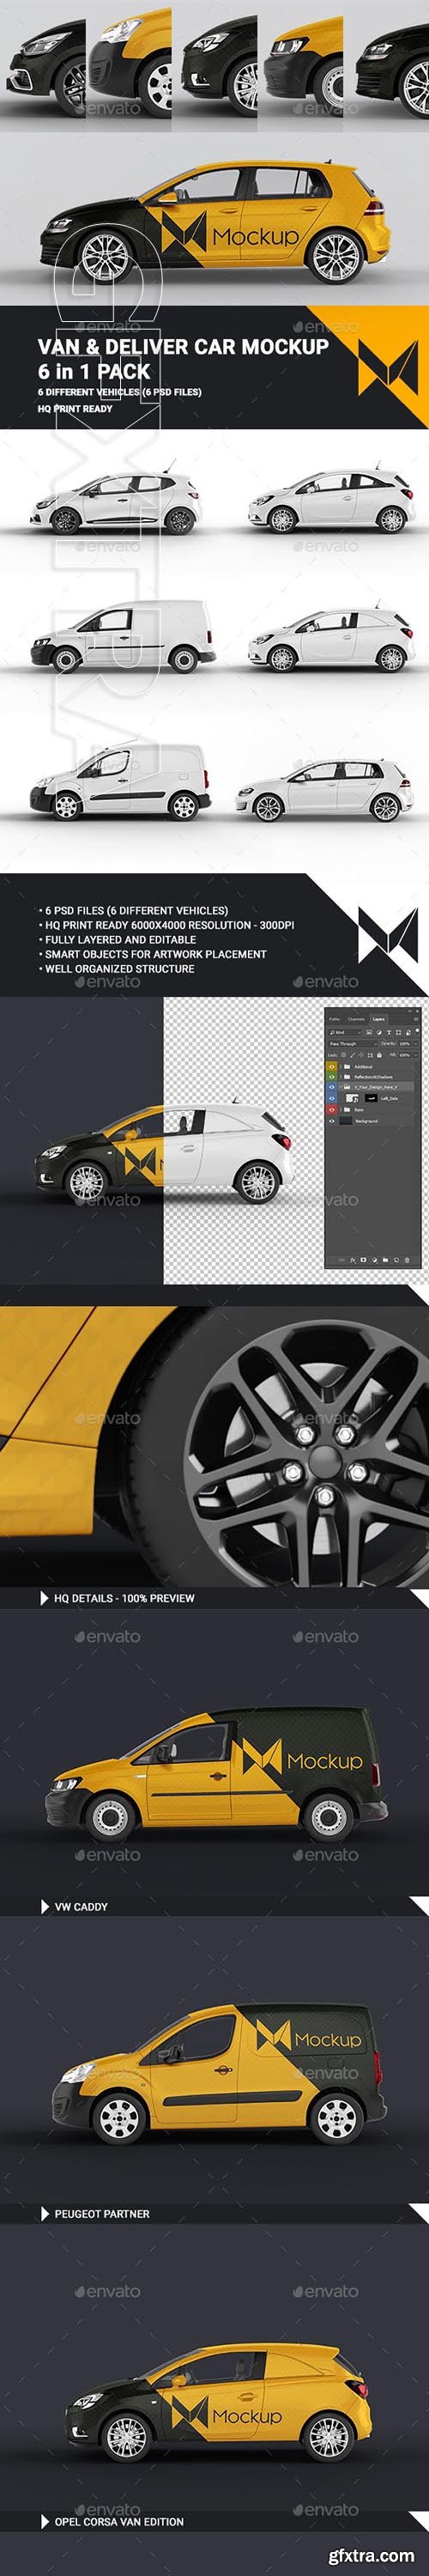 GraphicRiver - Van & Delivery Cars Mockup 6 in 1 Pack 23534131